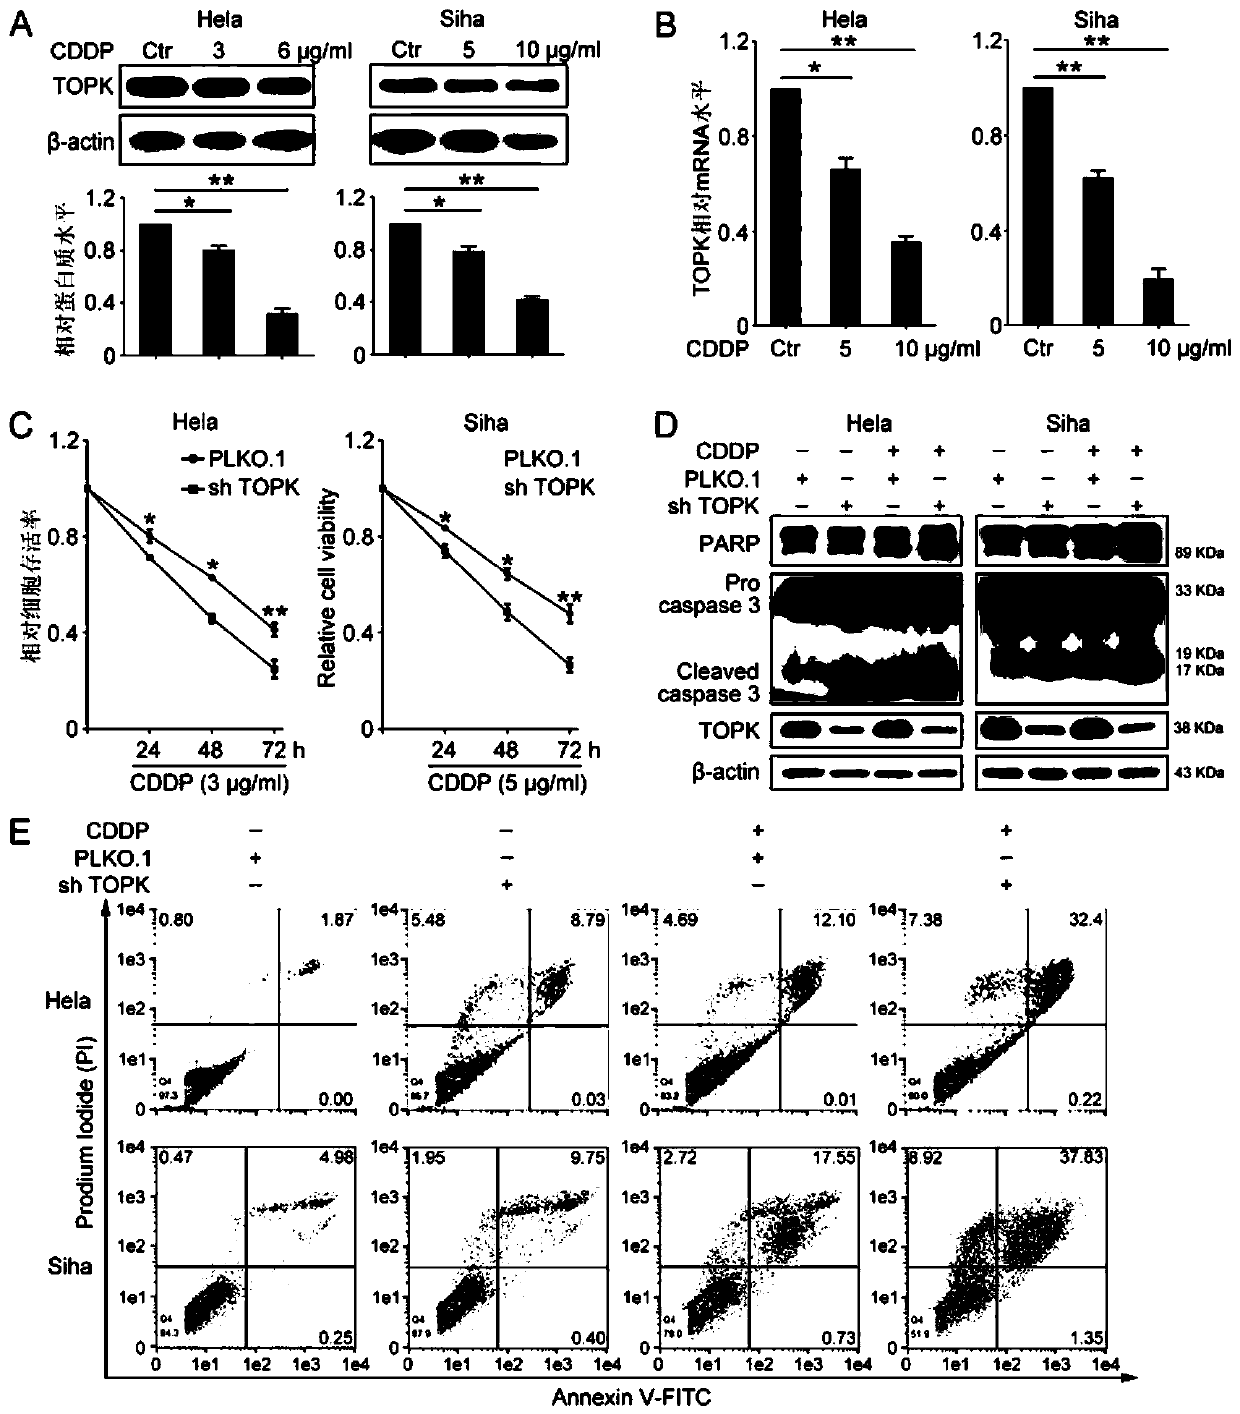 Application of T-LAK cell-originated protein kinase (TOPK) serving as cisplatin resistance therapy target for cervical cancer